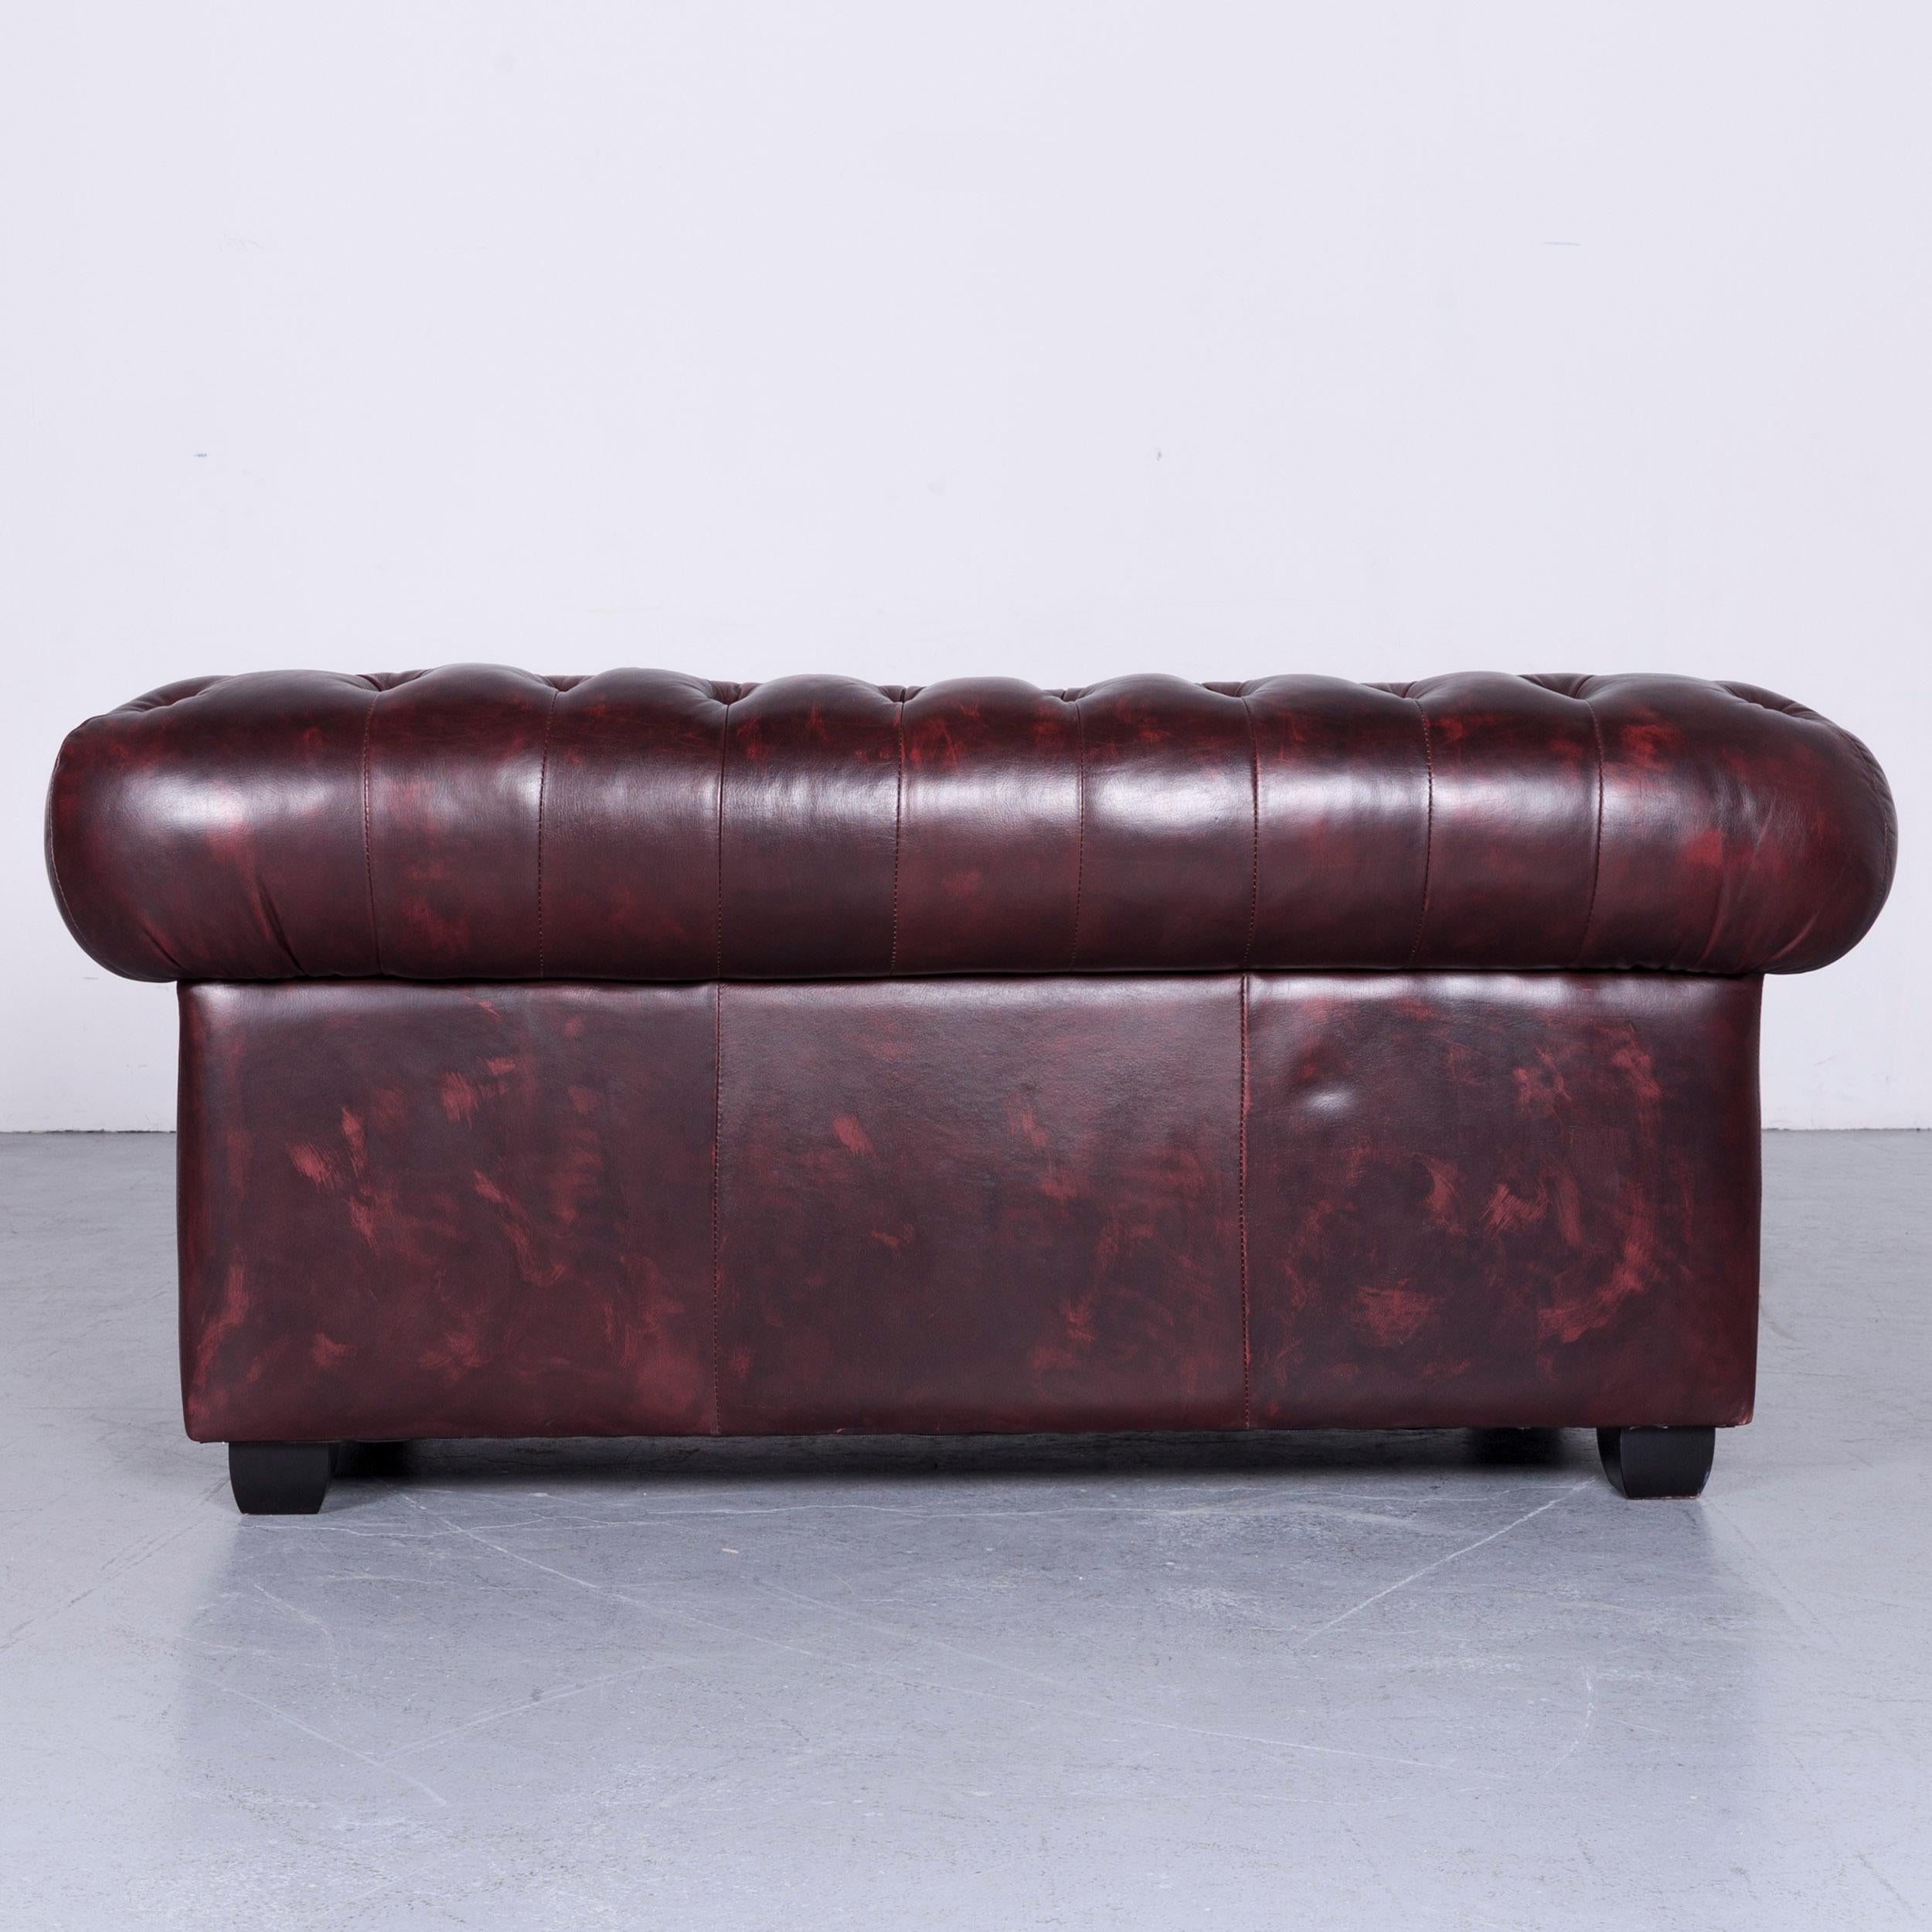 Chesterfield Leather Sofa Brown Three-Seat Couch Vintage Retro 15